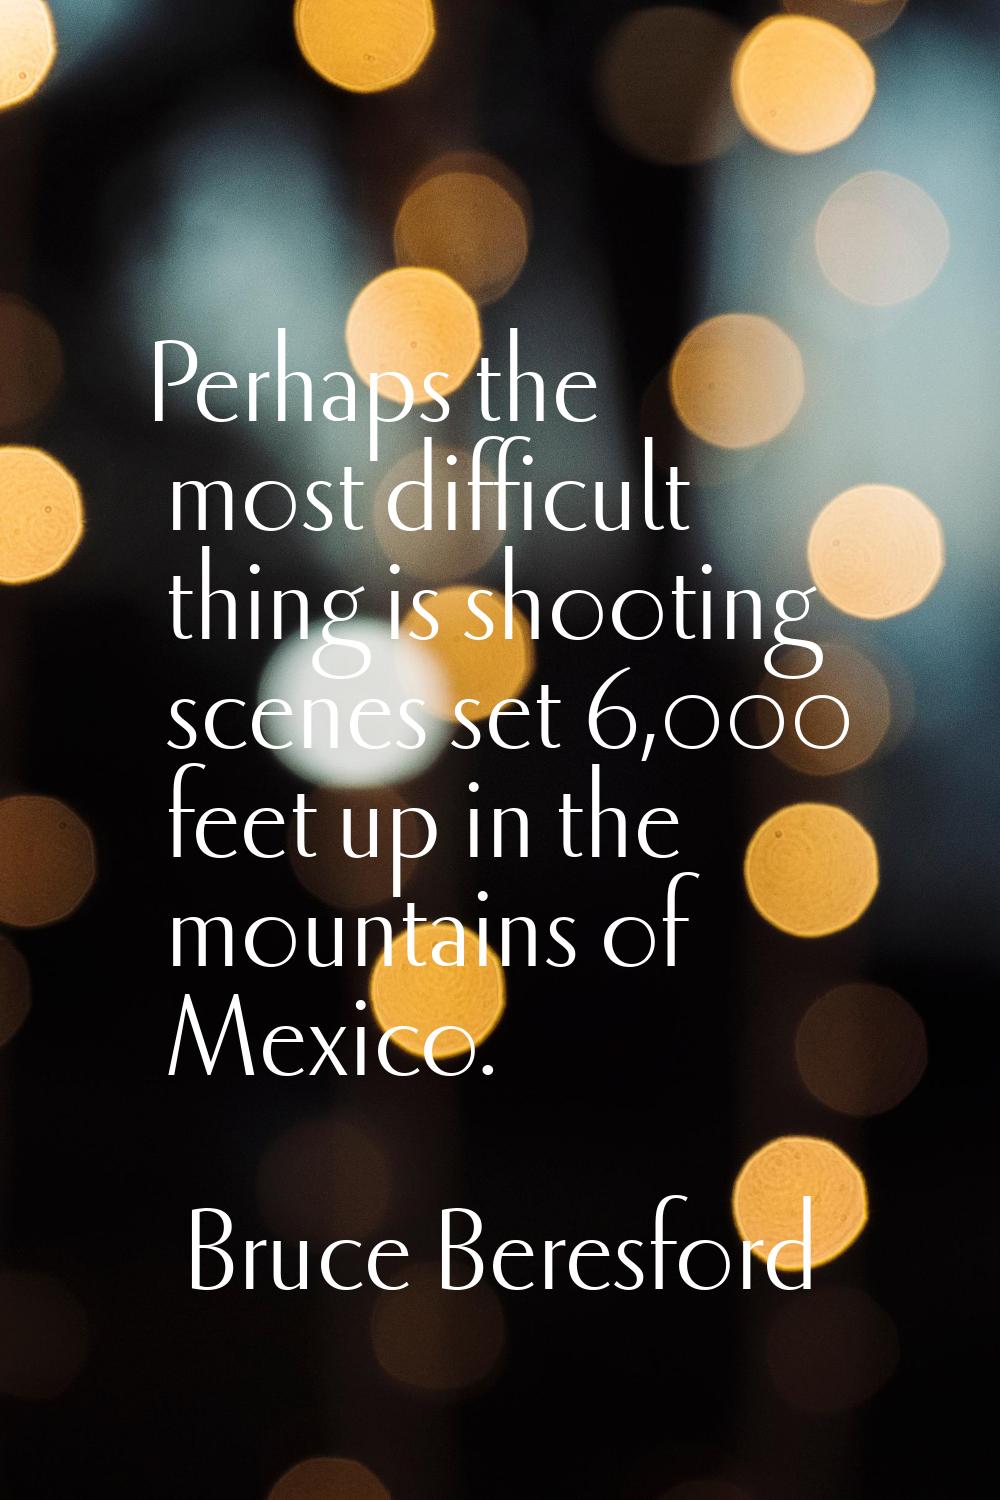 Perhaps the most difficult thing is shooting scenes set 6,000 feet up in the mountains of Mexico.